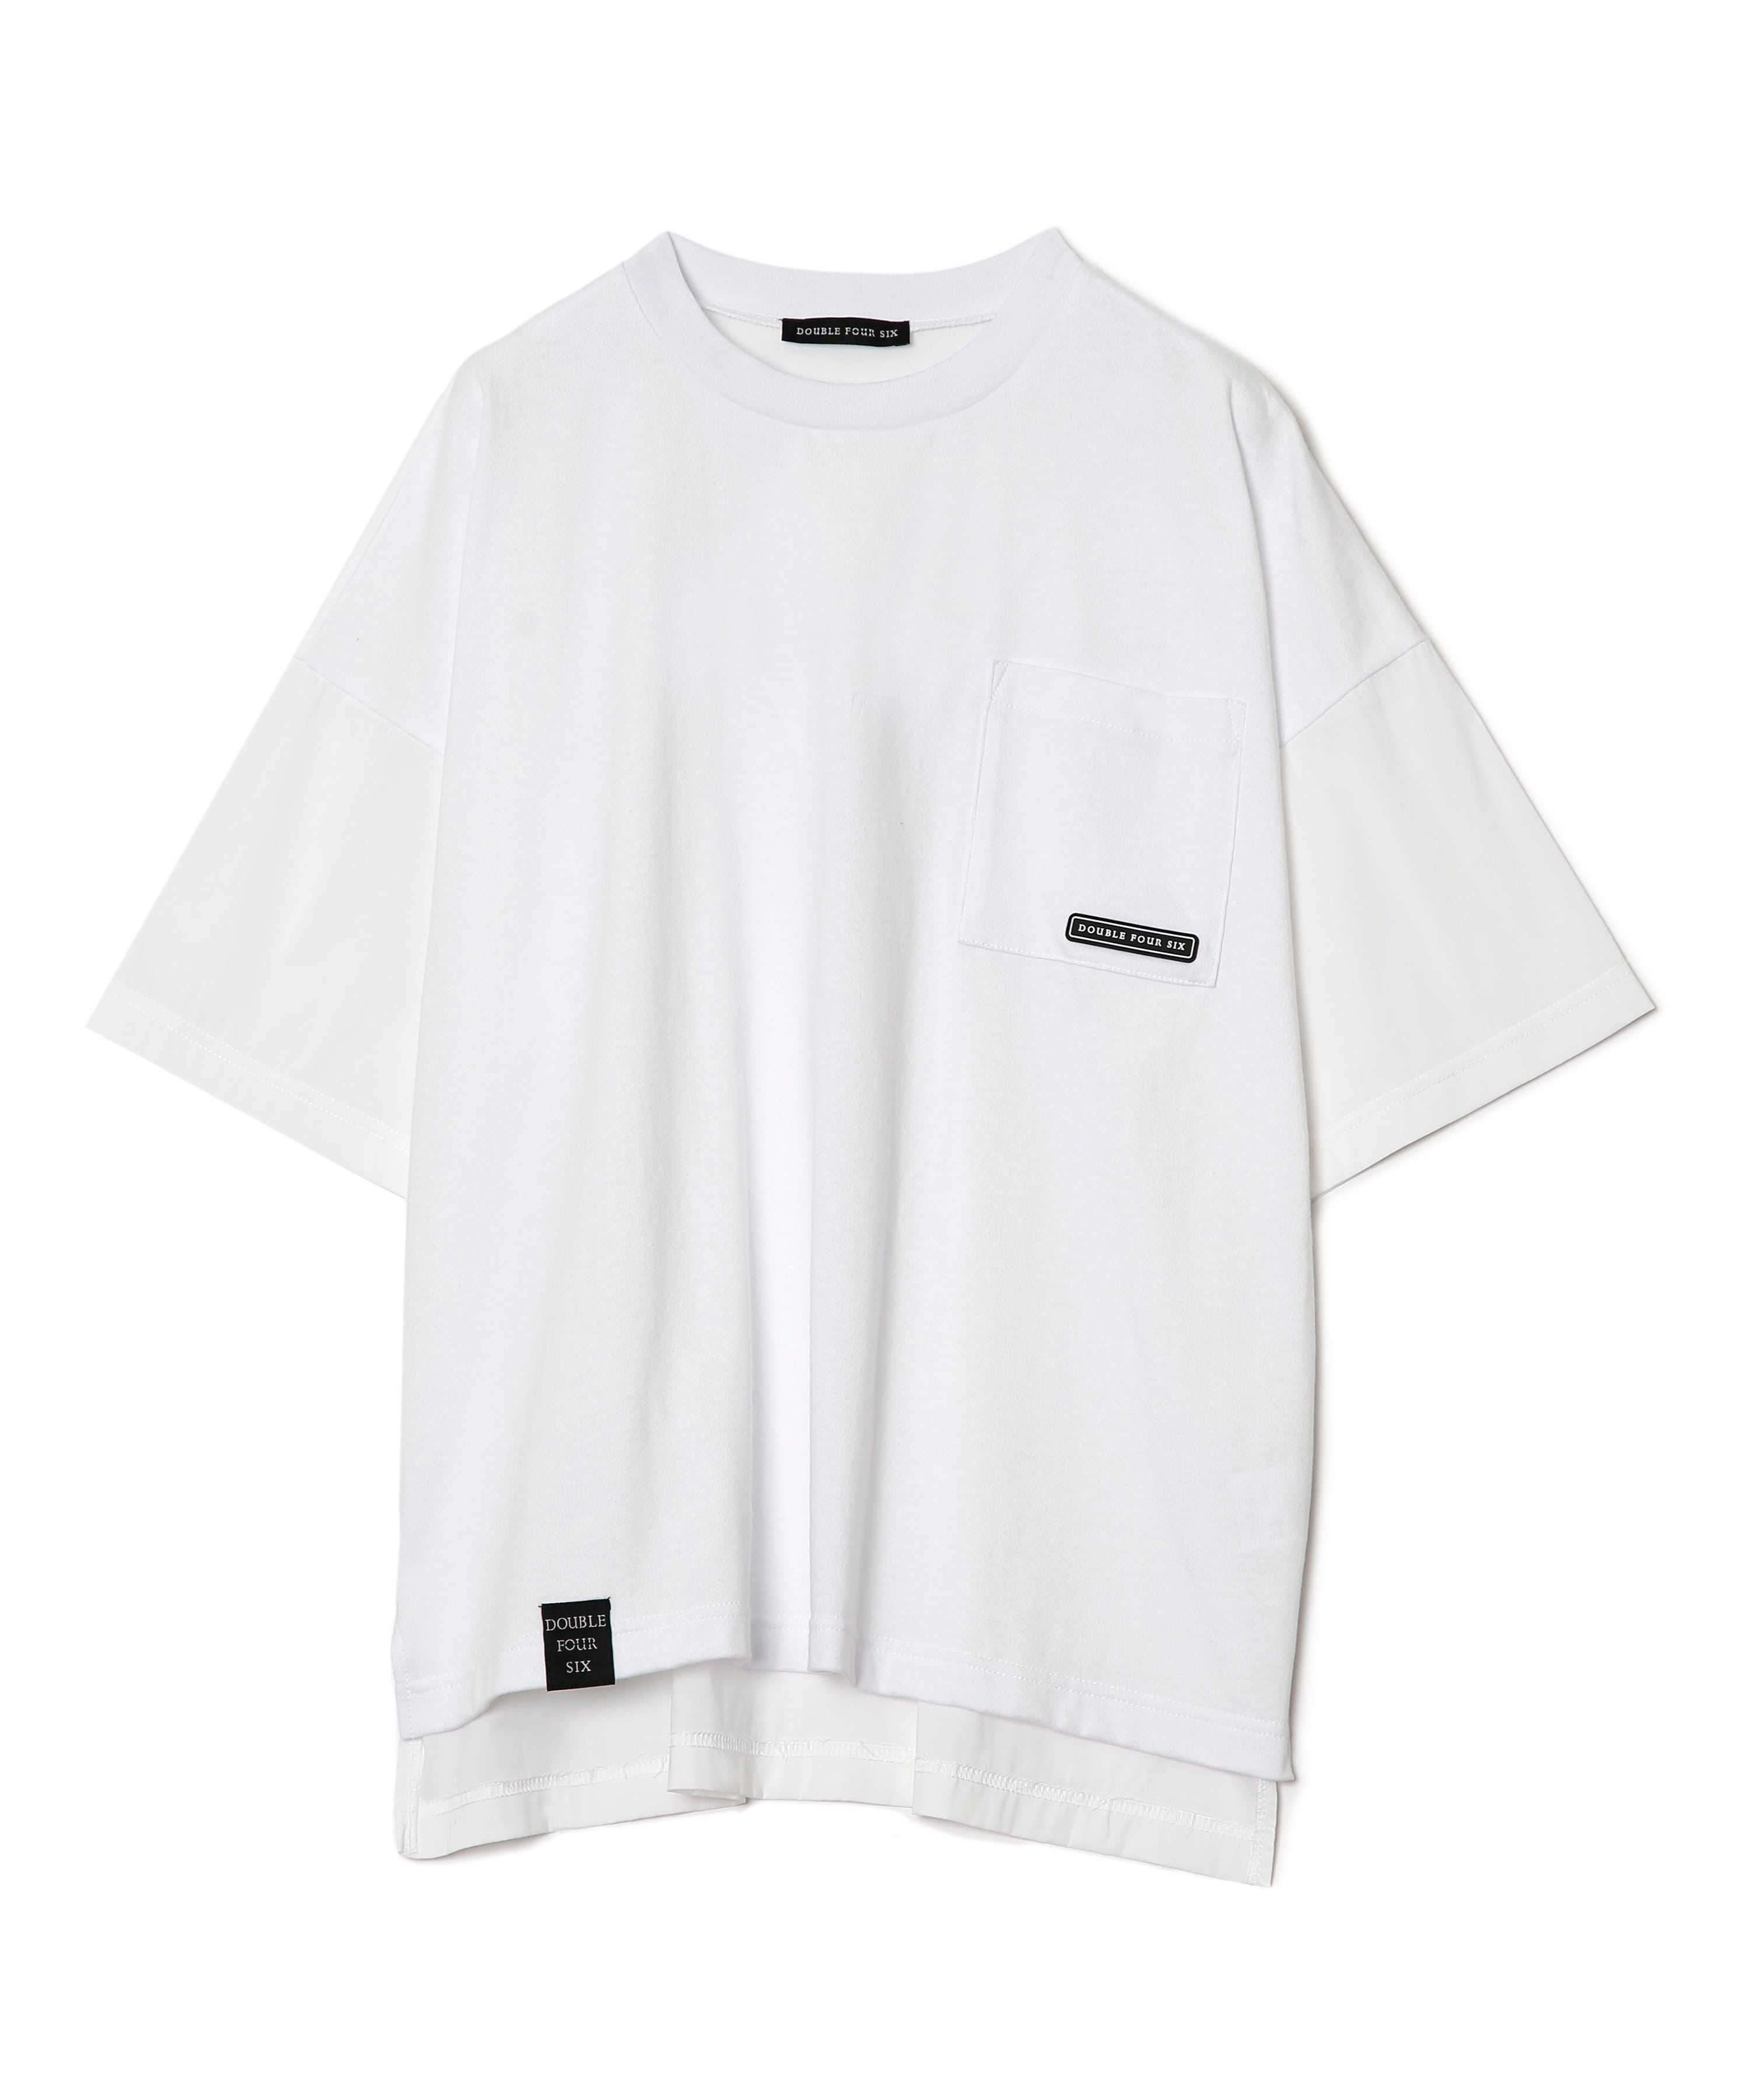 Multi-material T-shirt White – 446 - DOUBLE FOUR SIX -